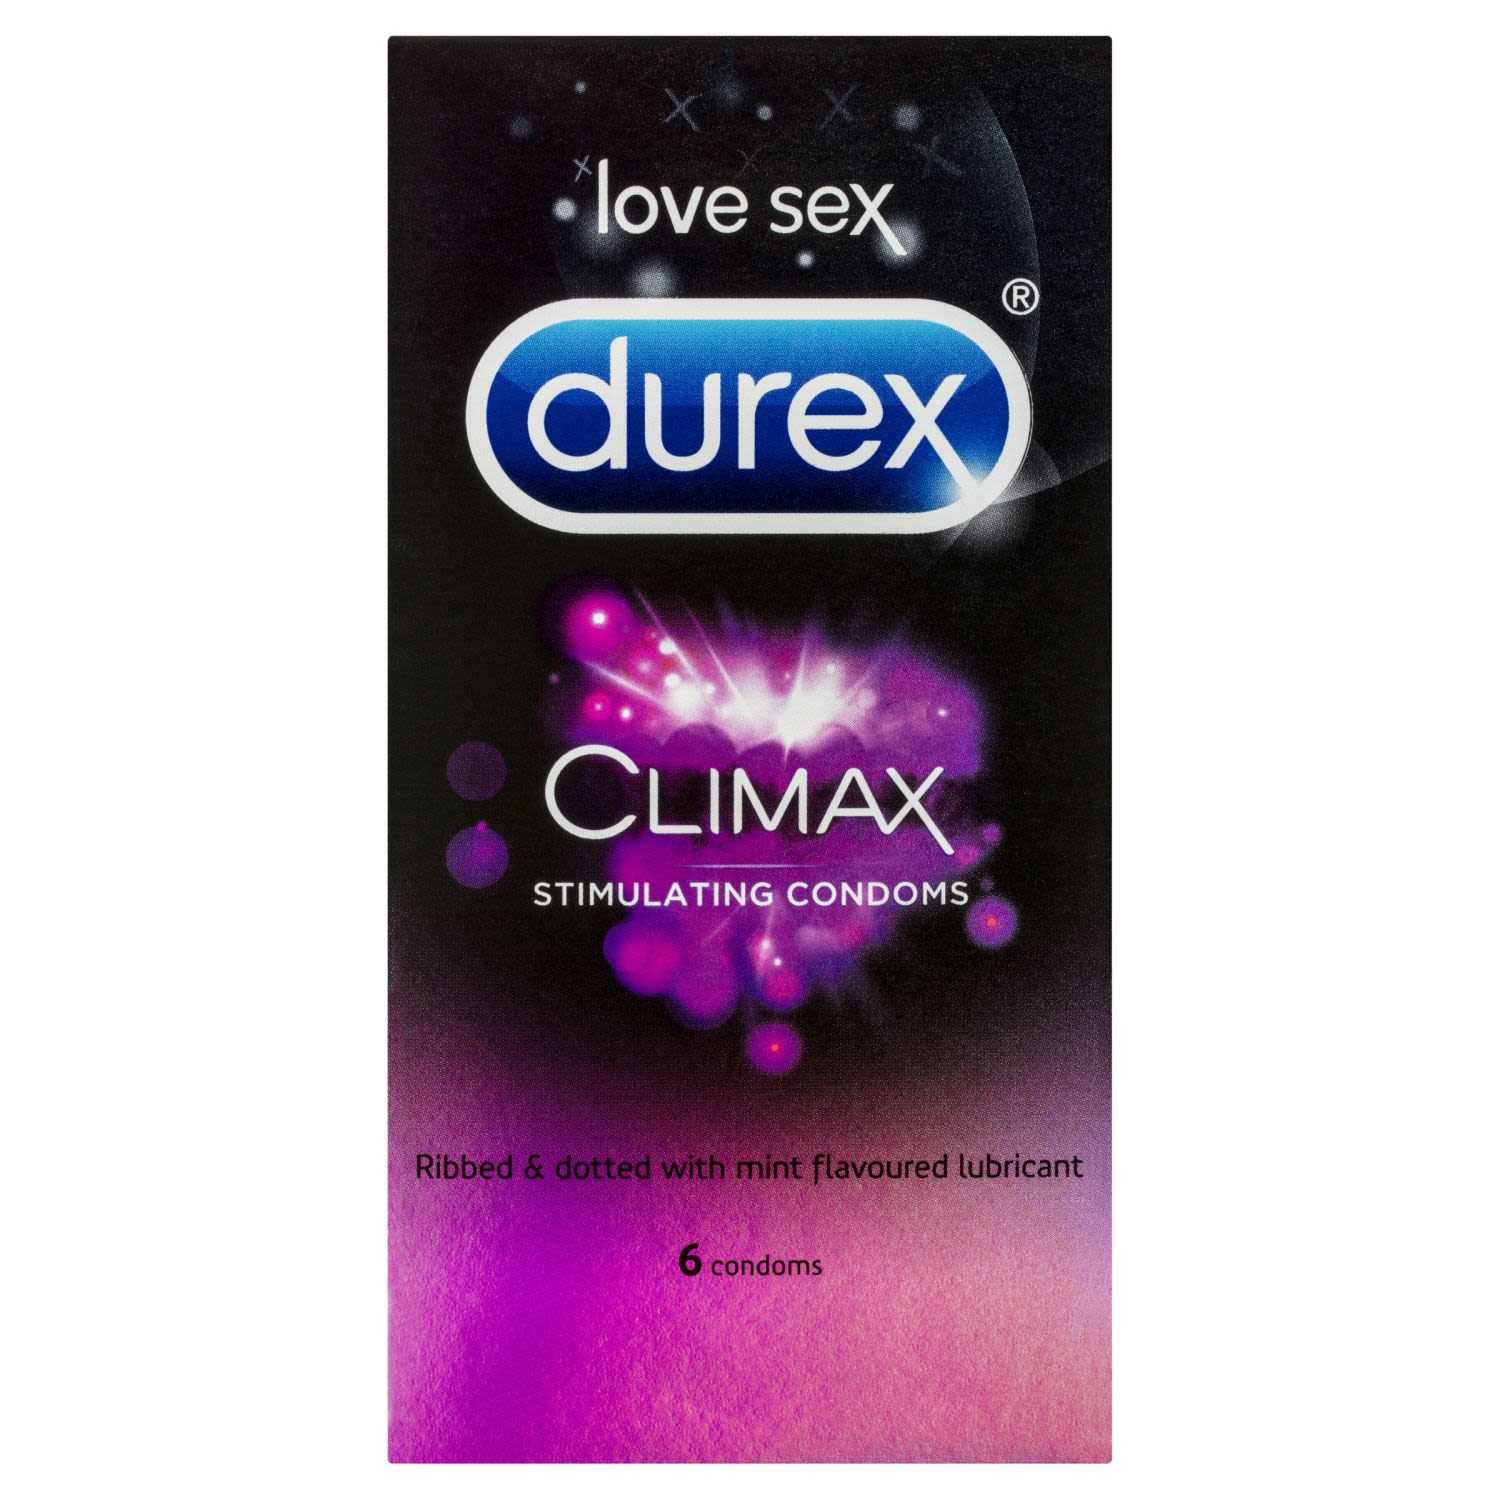 Durex Climax Stimulating Condoms Ribbed Dotted, 6 Each